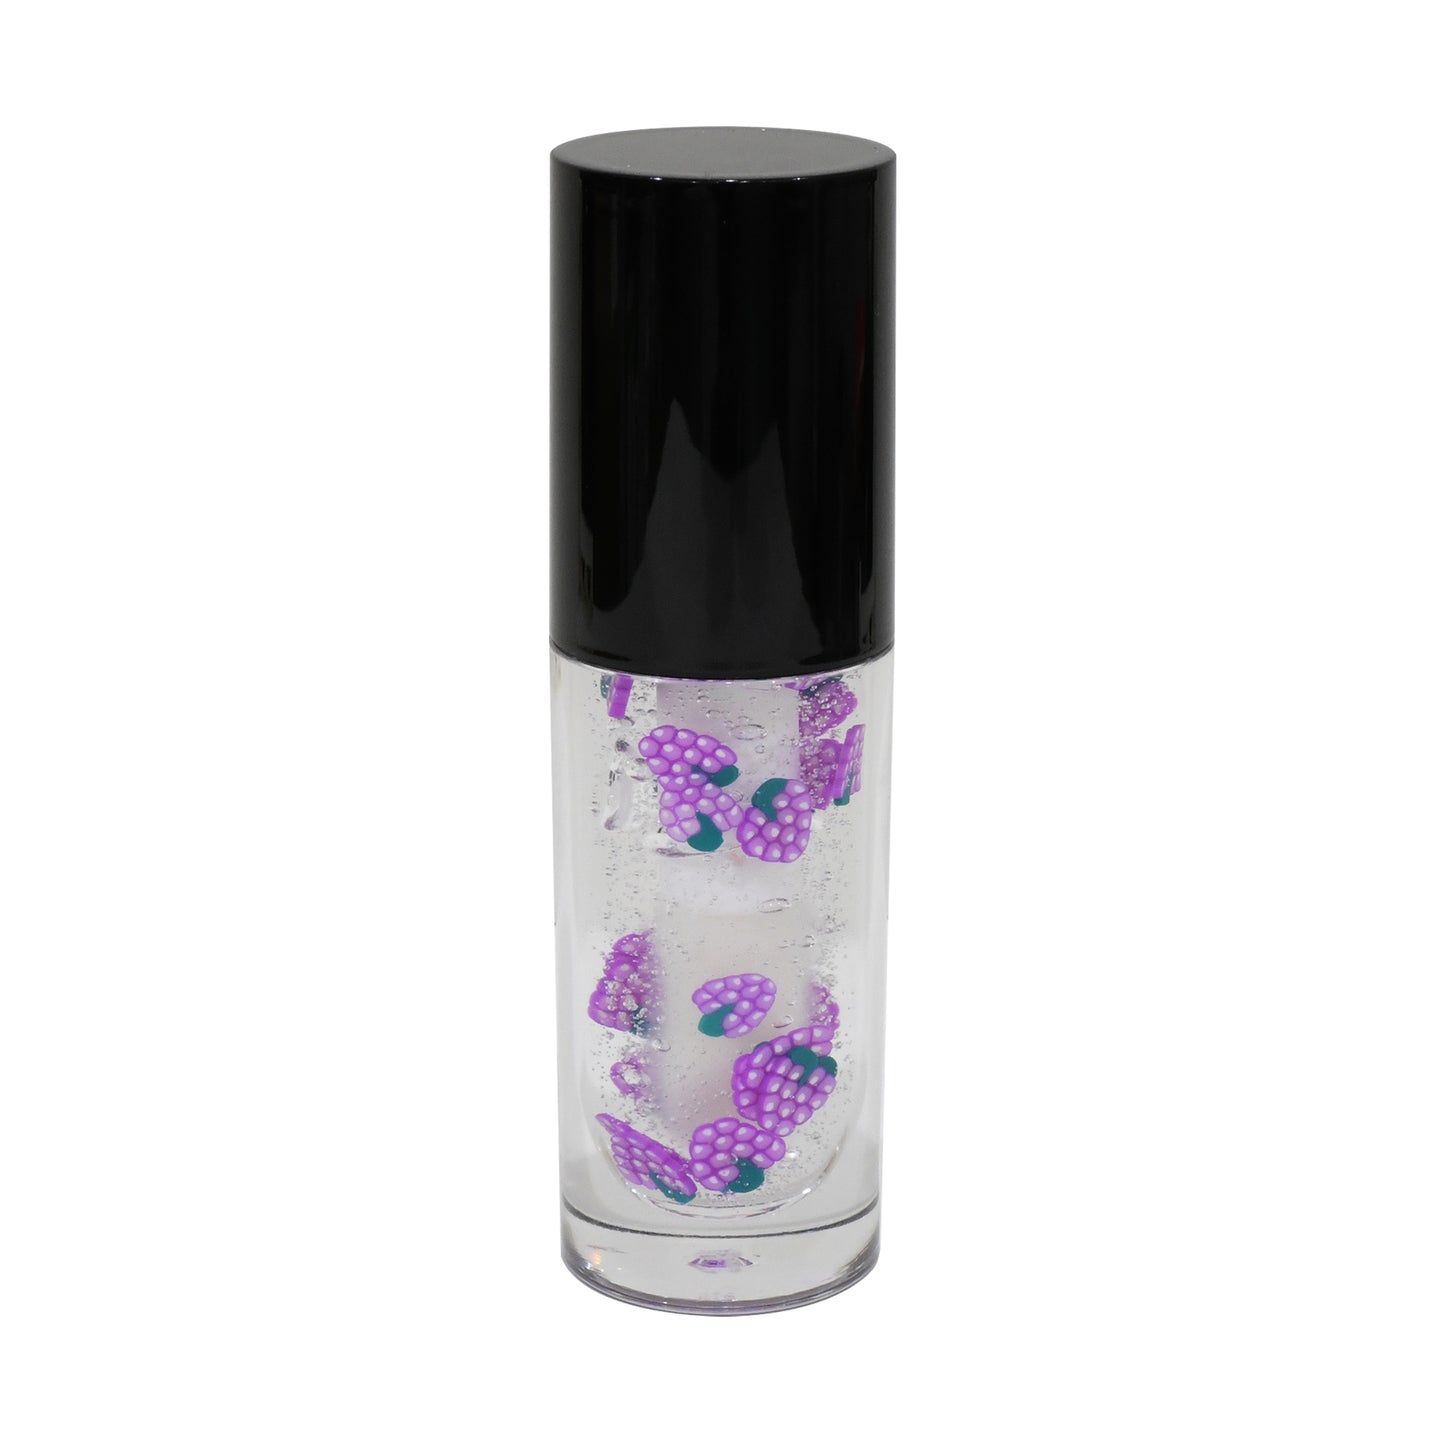 Grapes Flavor Big Brush Wand Hydrating Non-sticky Premium Clear Lip Gloss Infused With Hyaluronic Acid